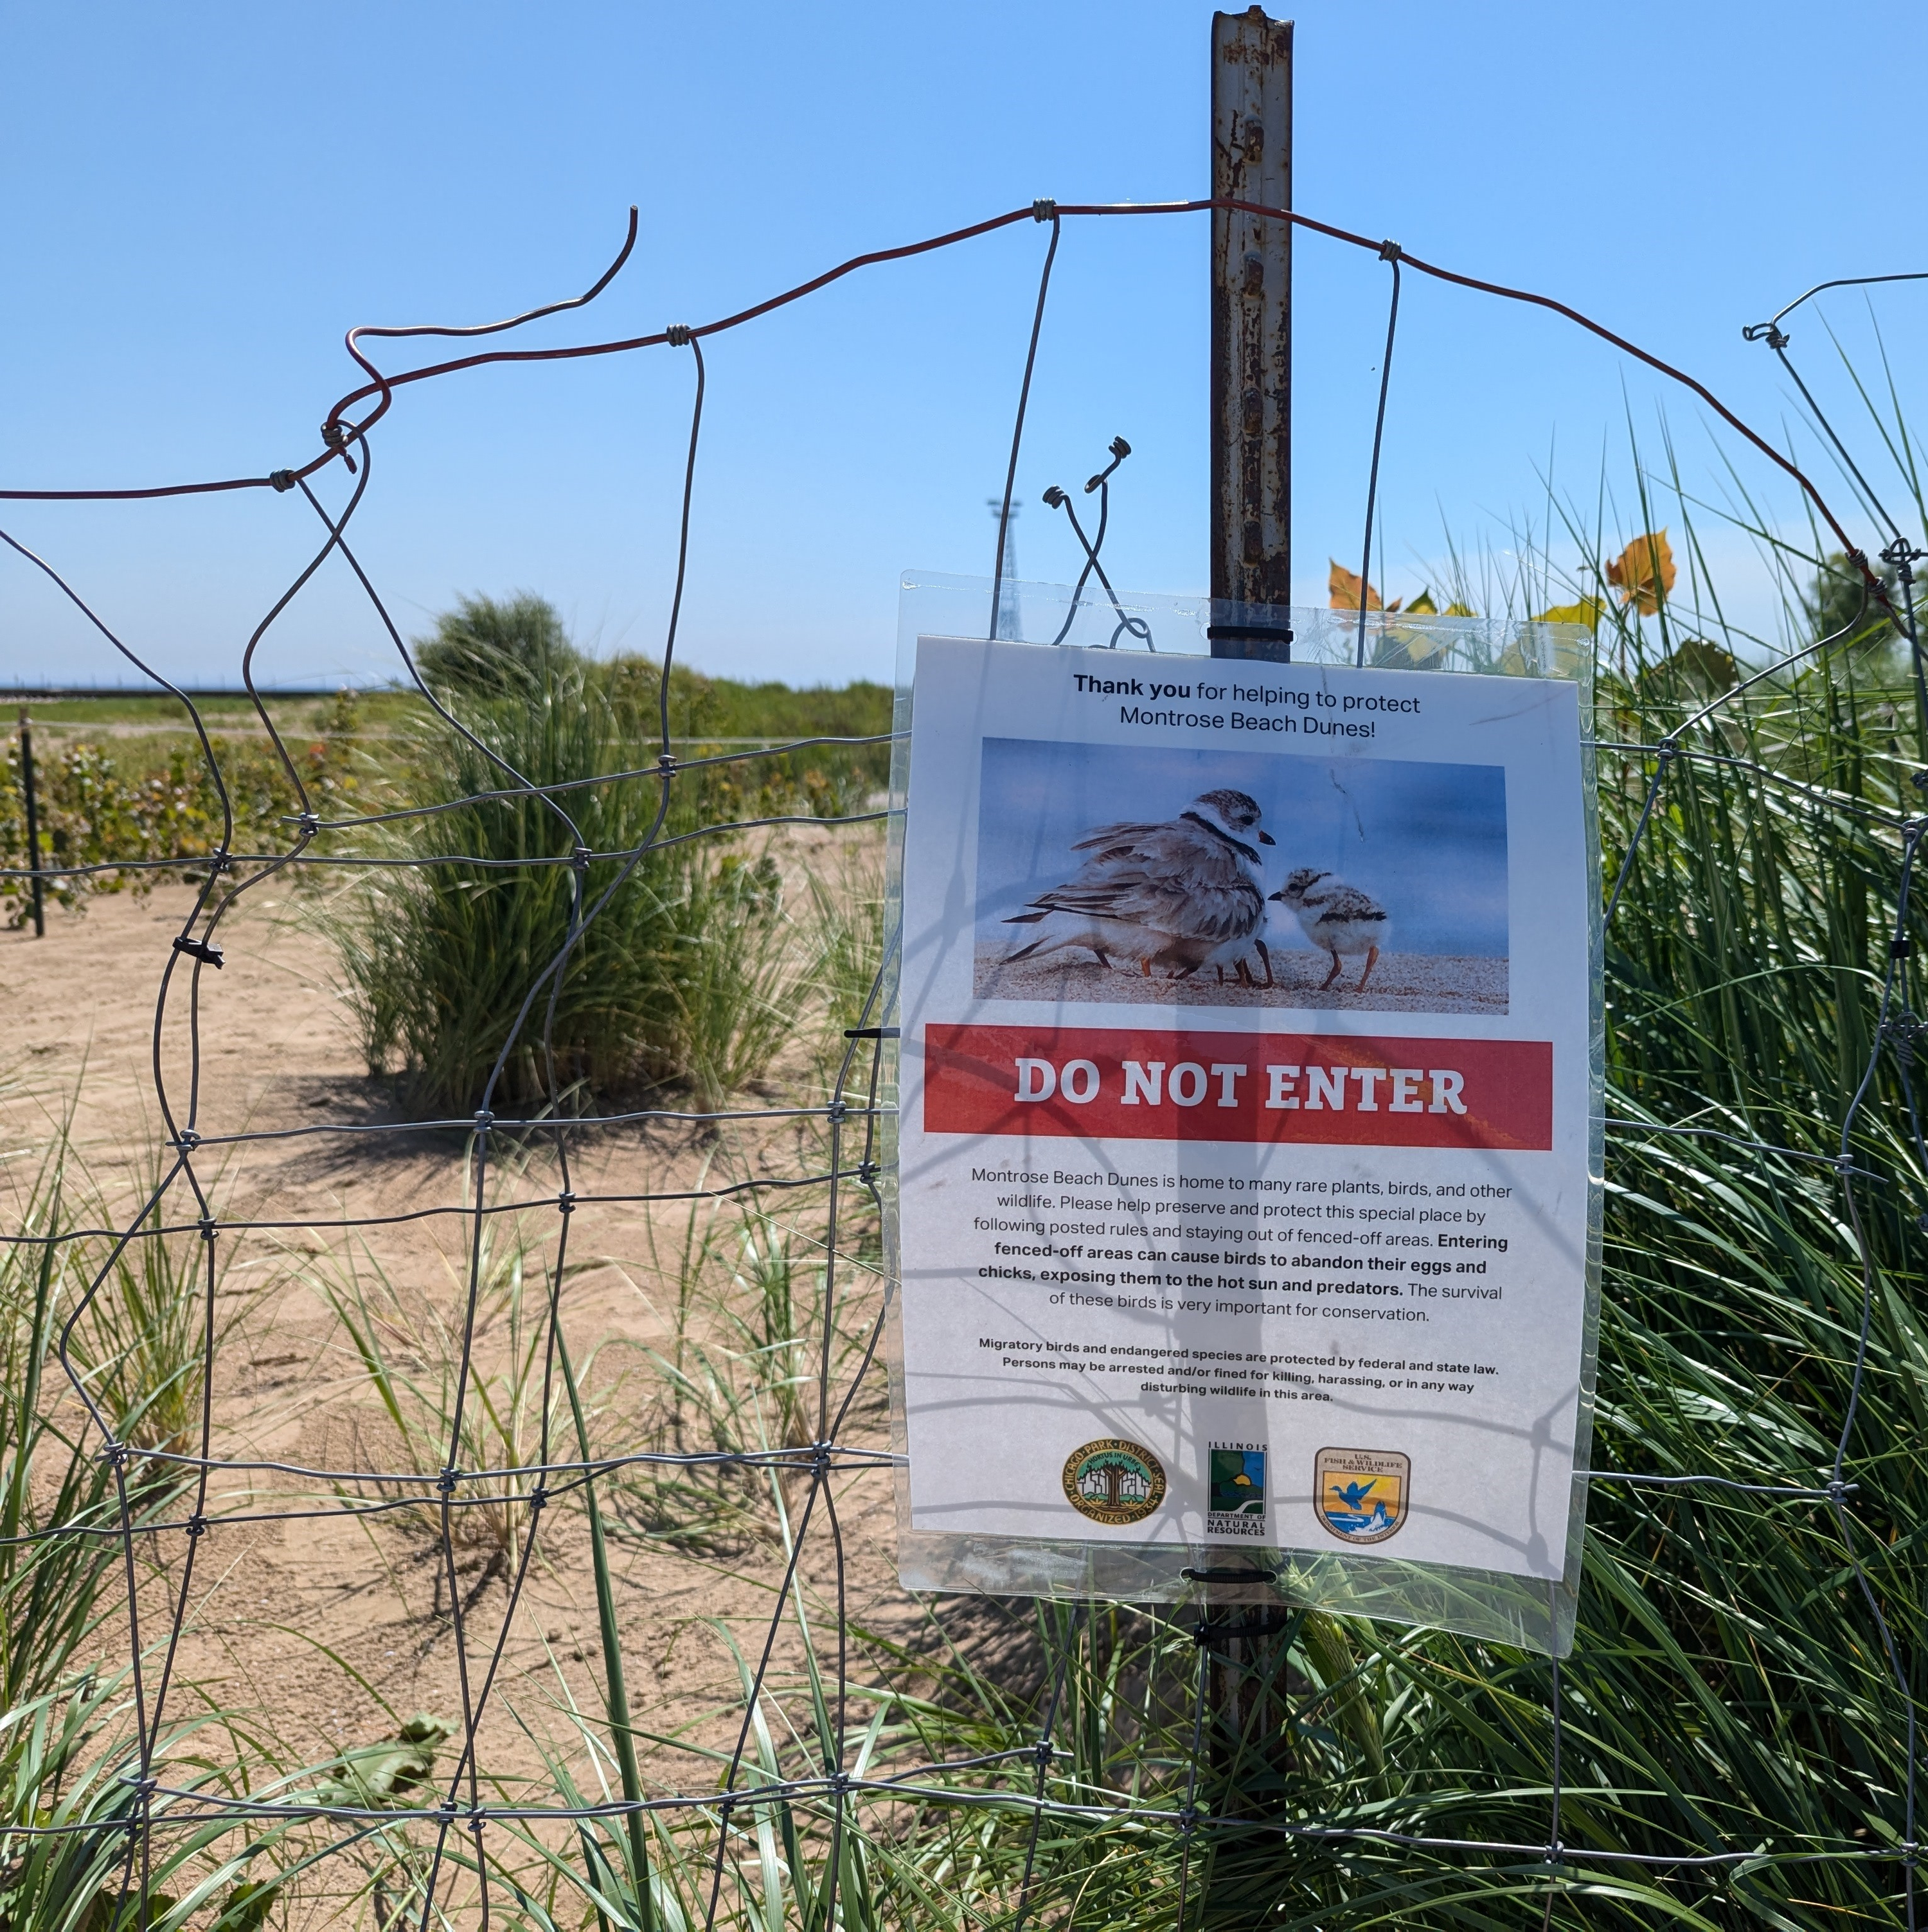 After deaths of 3 piping plover chicks, volunteers remain hopeful